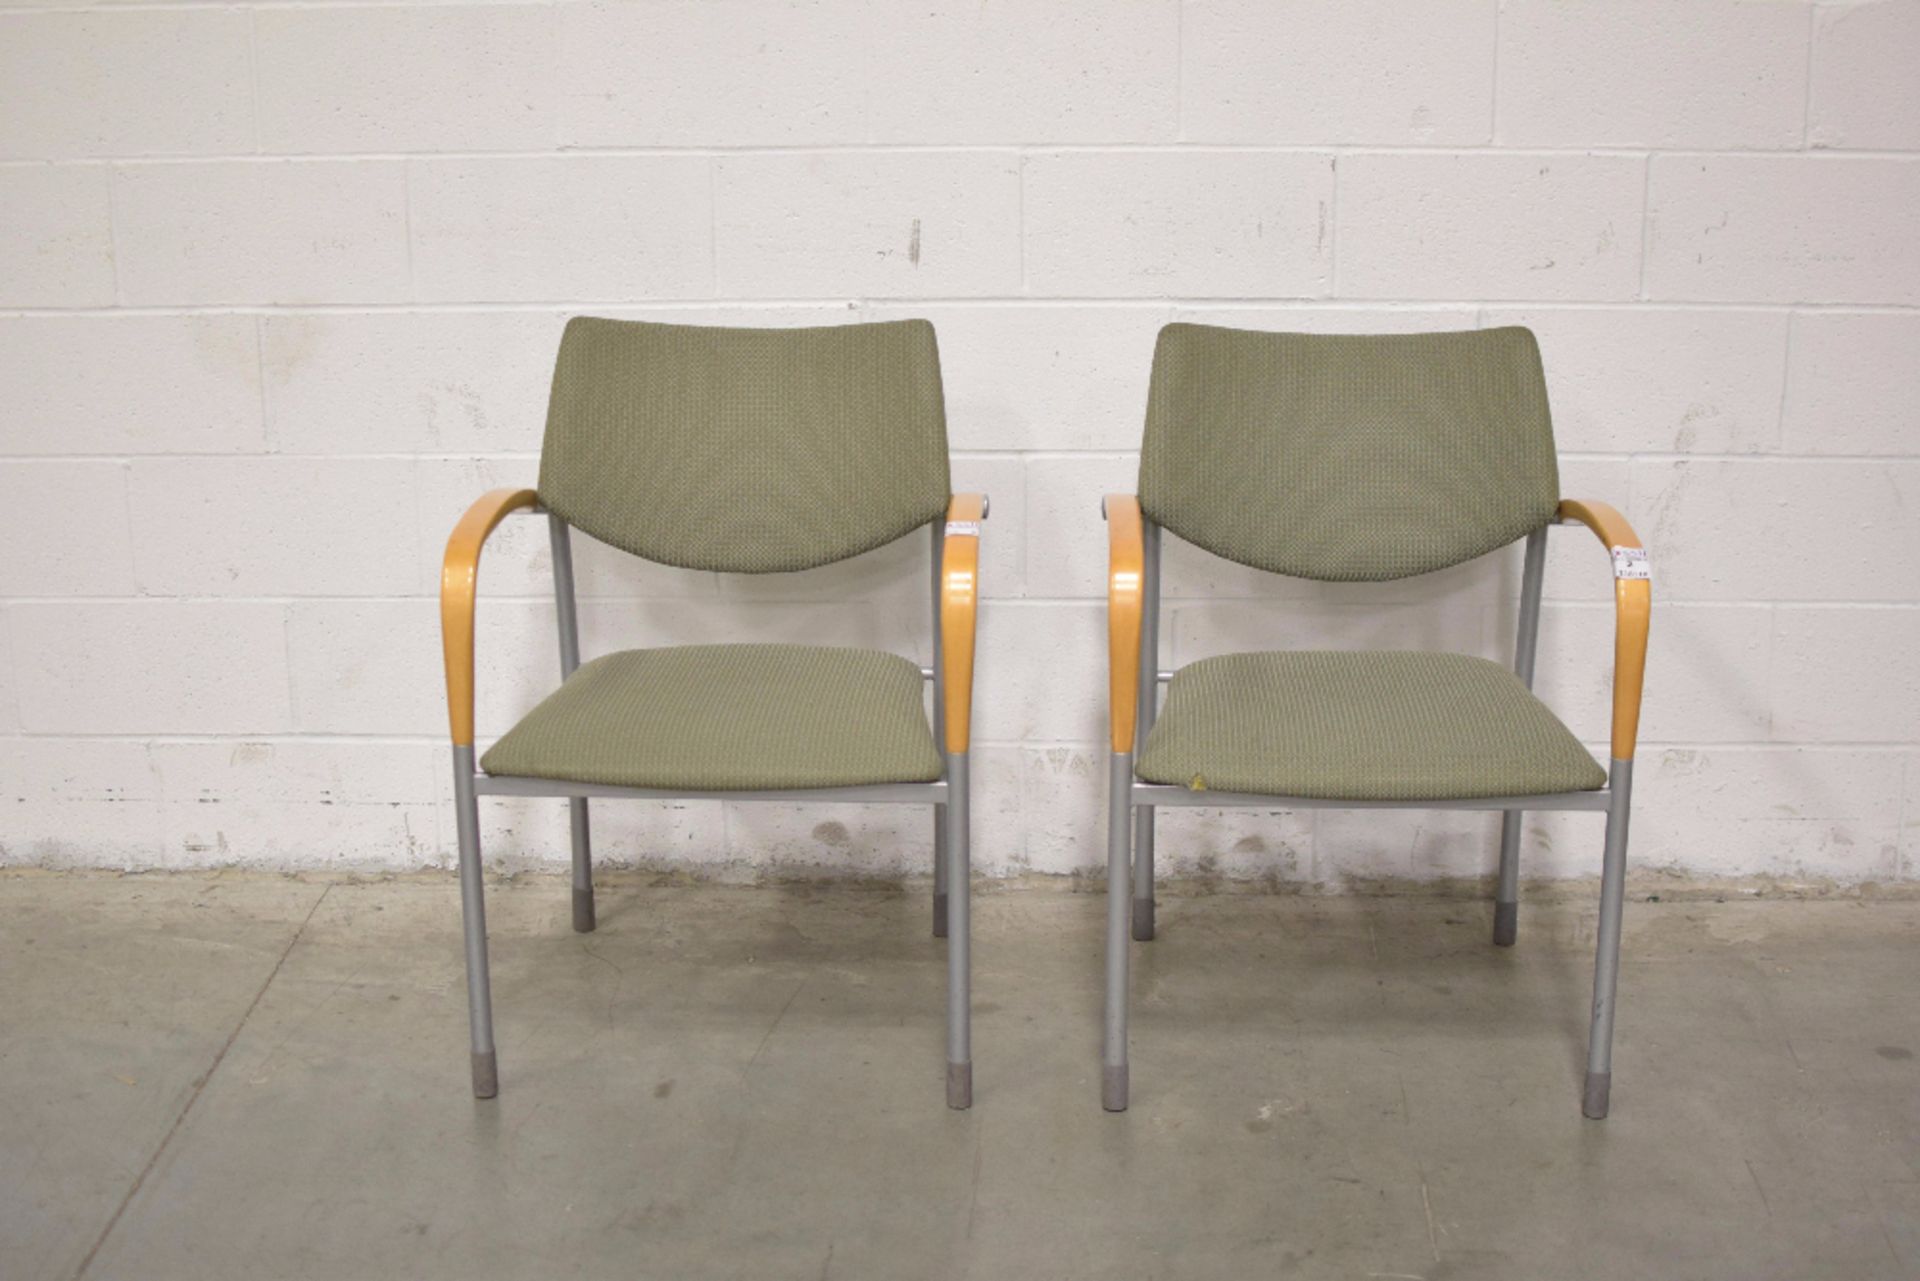 Lot of (2) Stationary Office Chairs